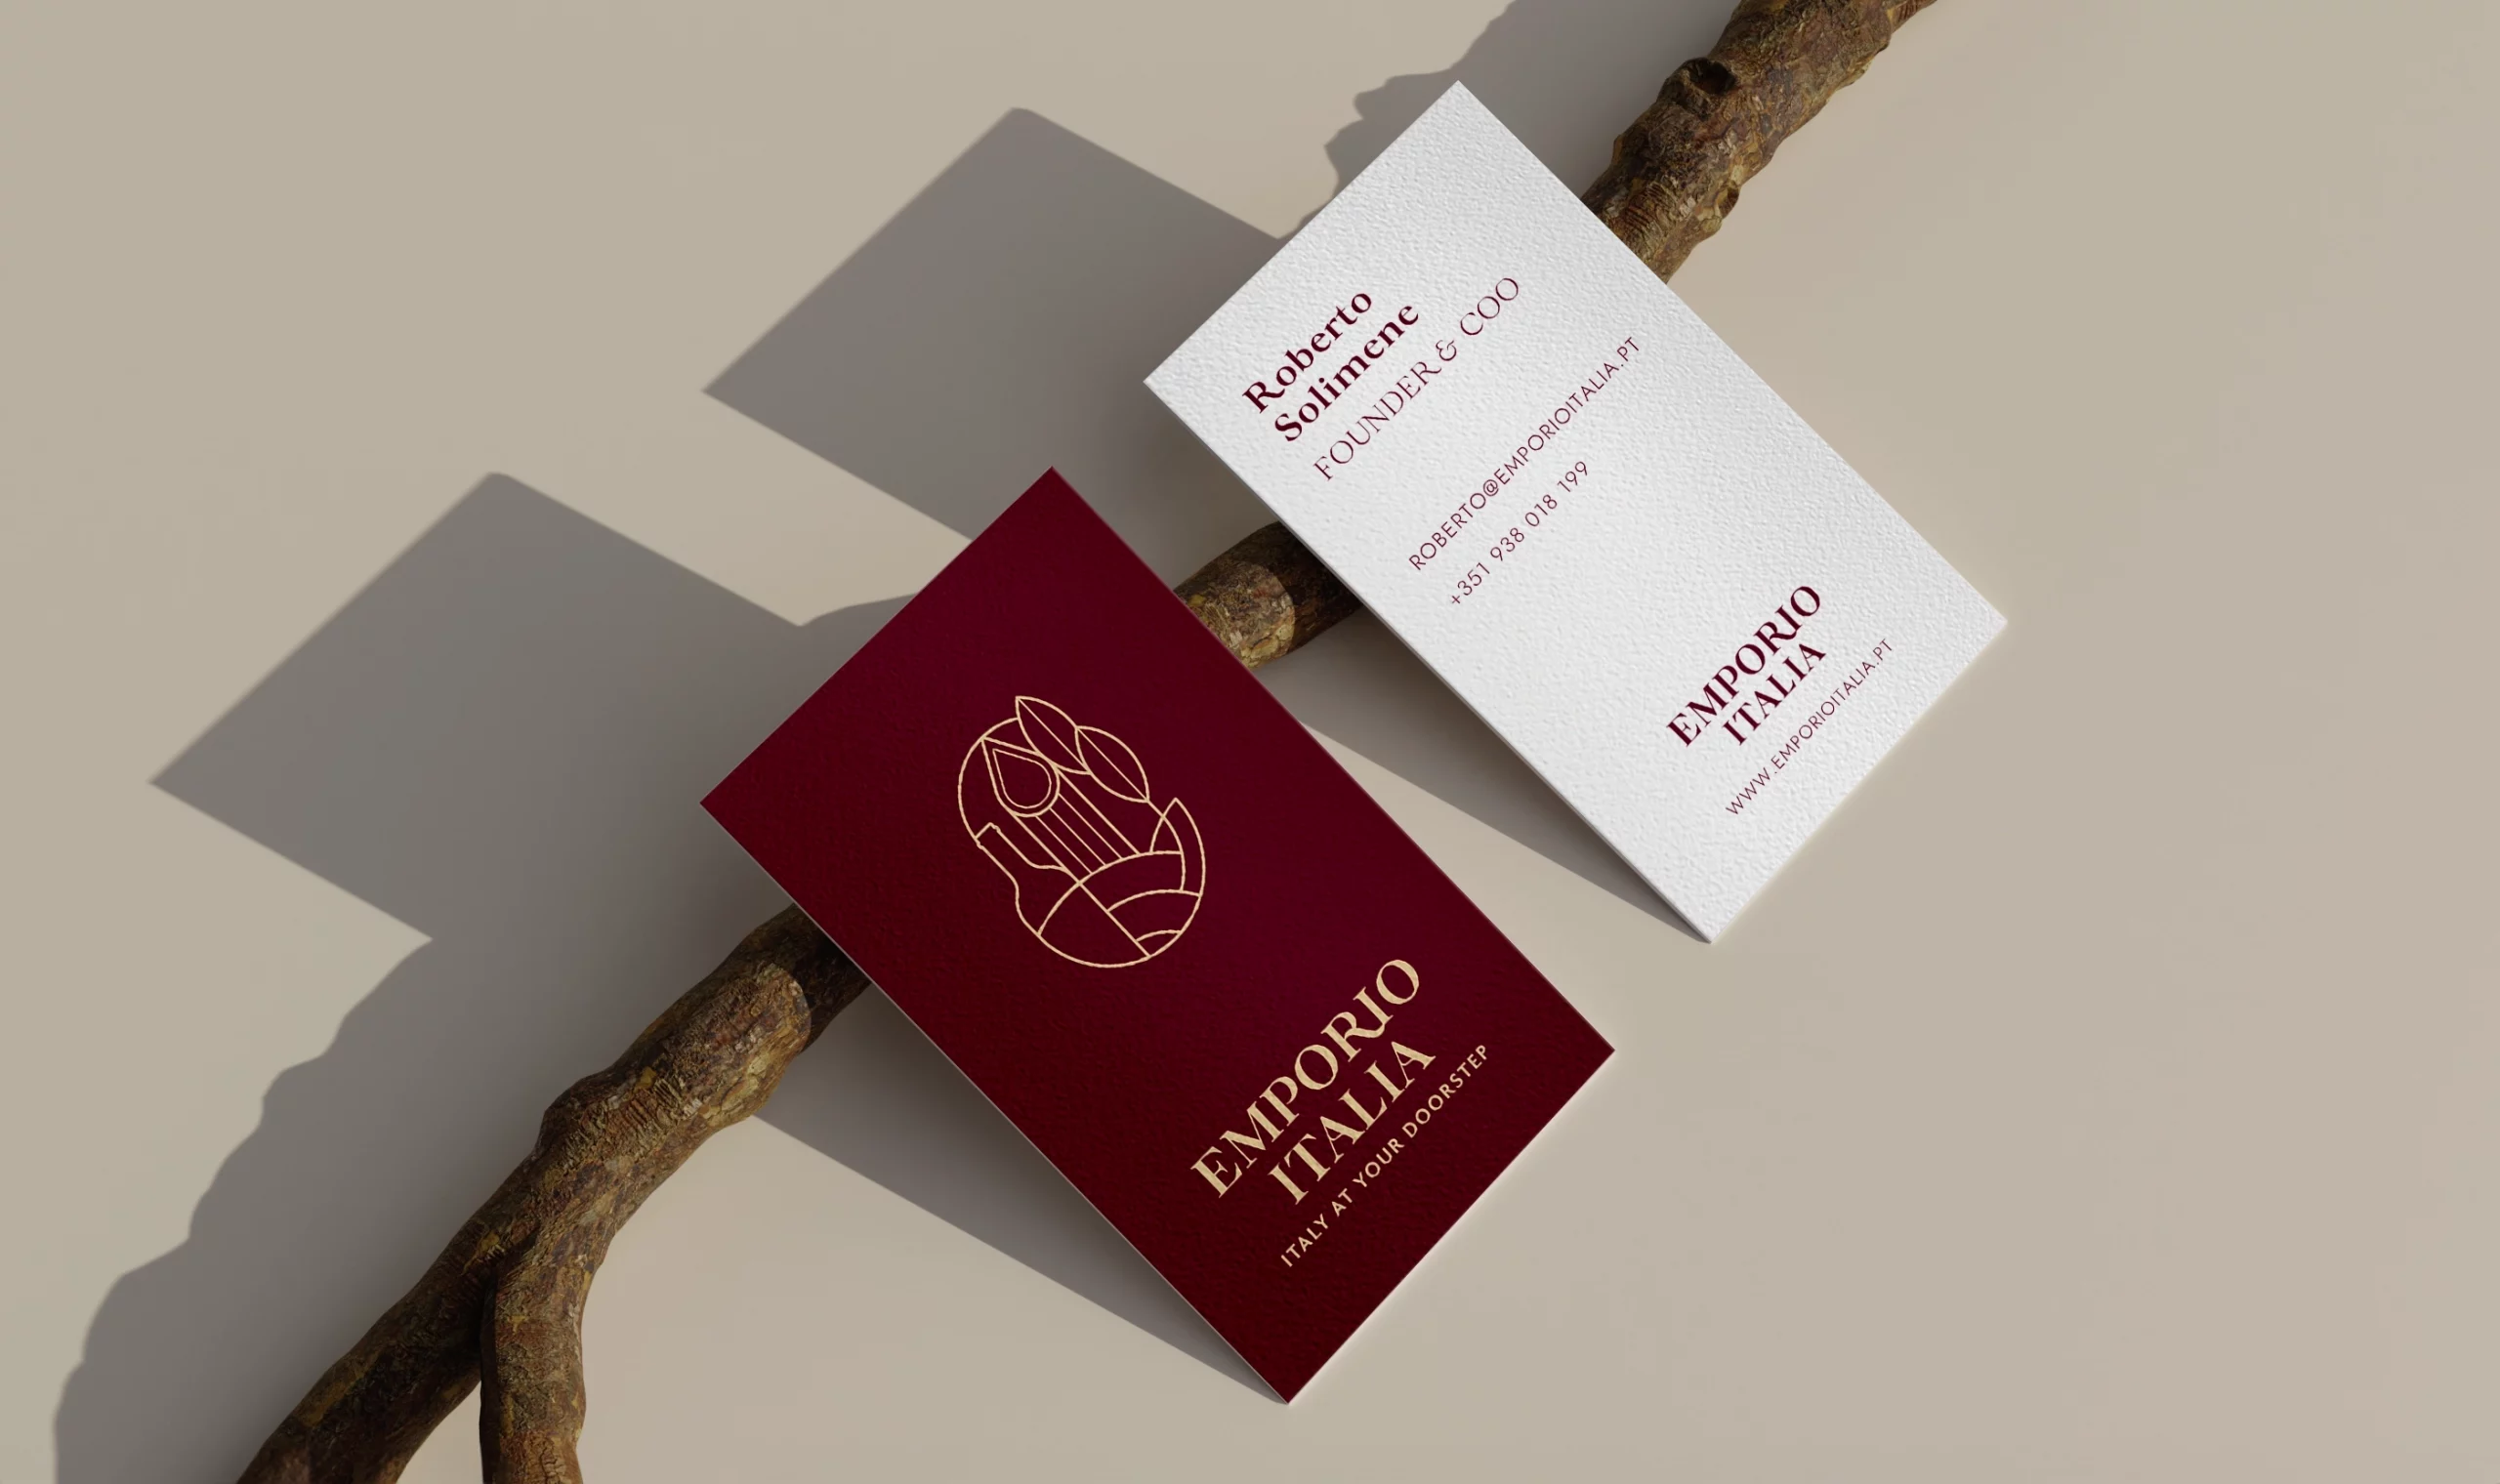 Emporio Italia's business cards image, showing front and back.